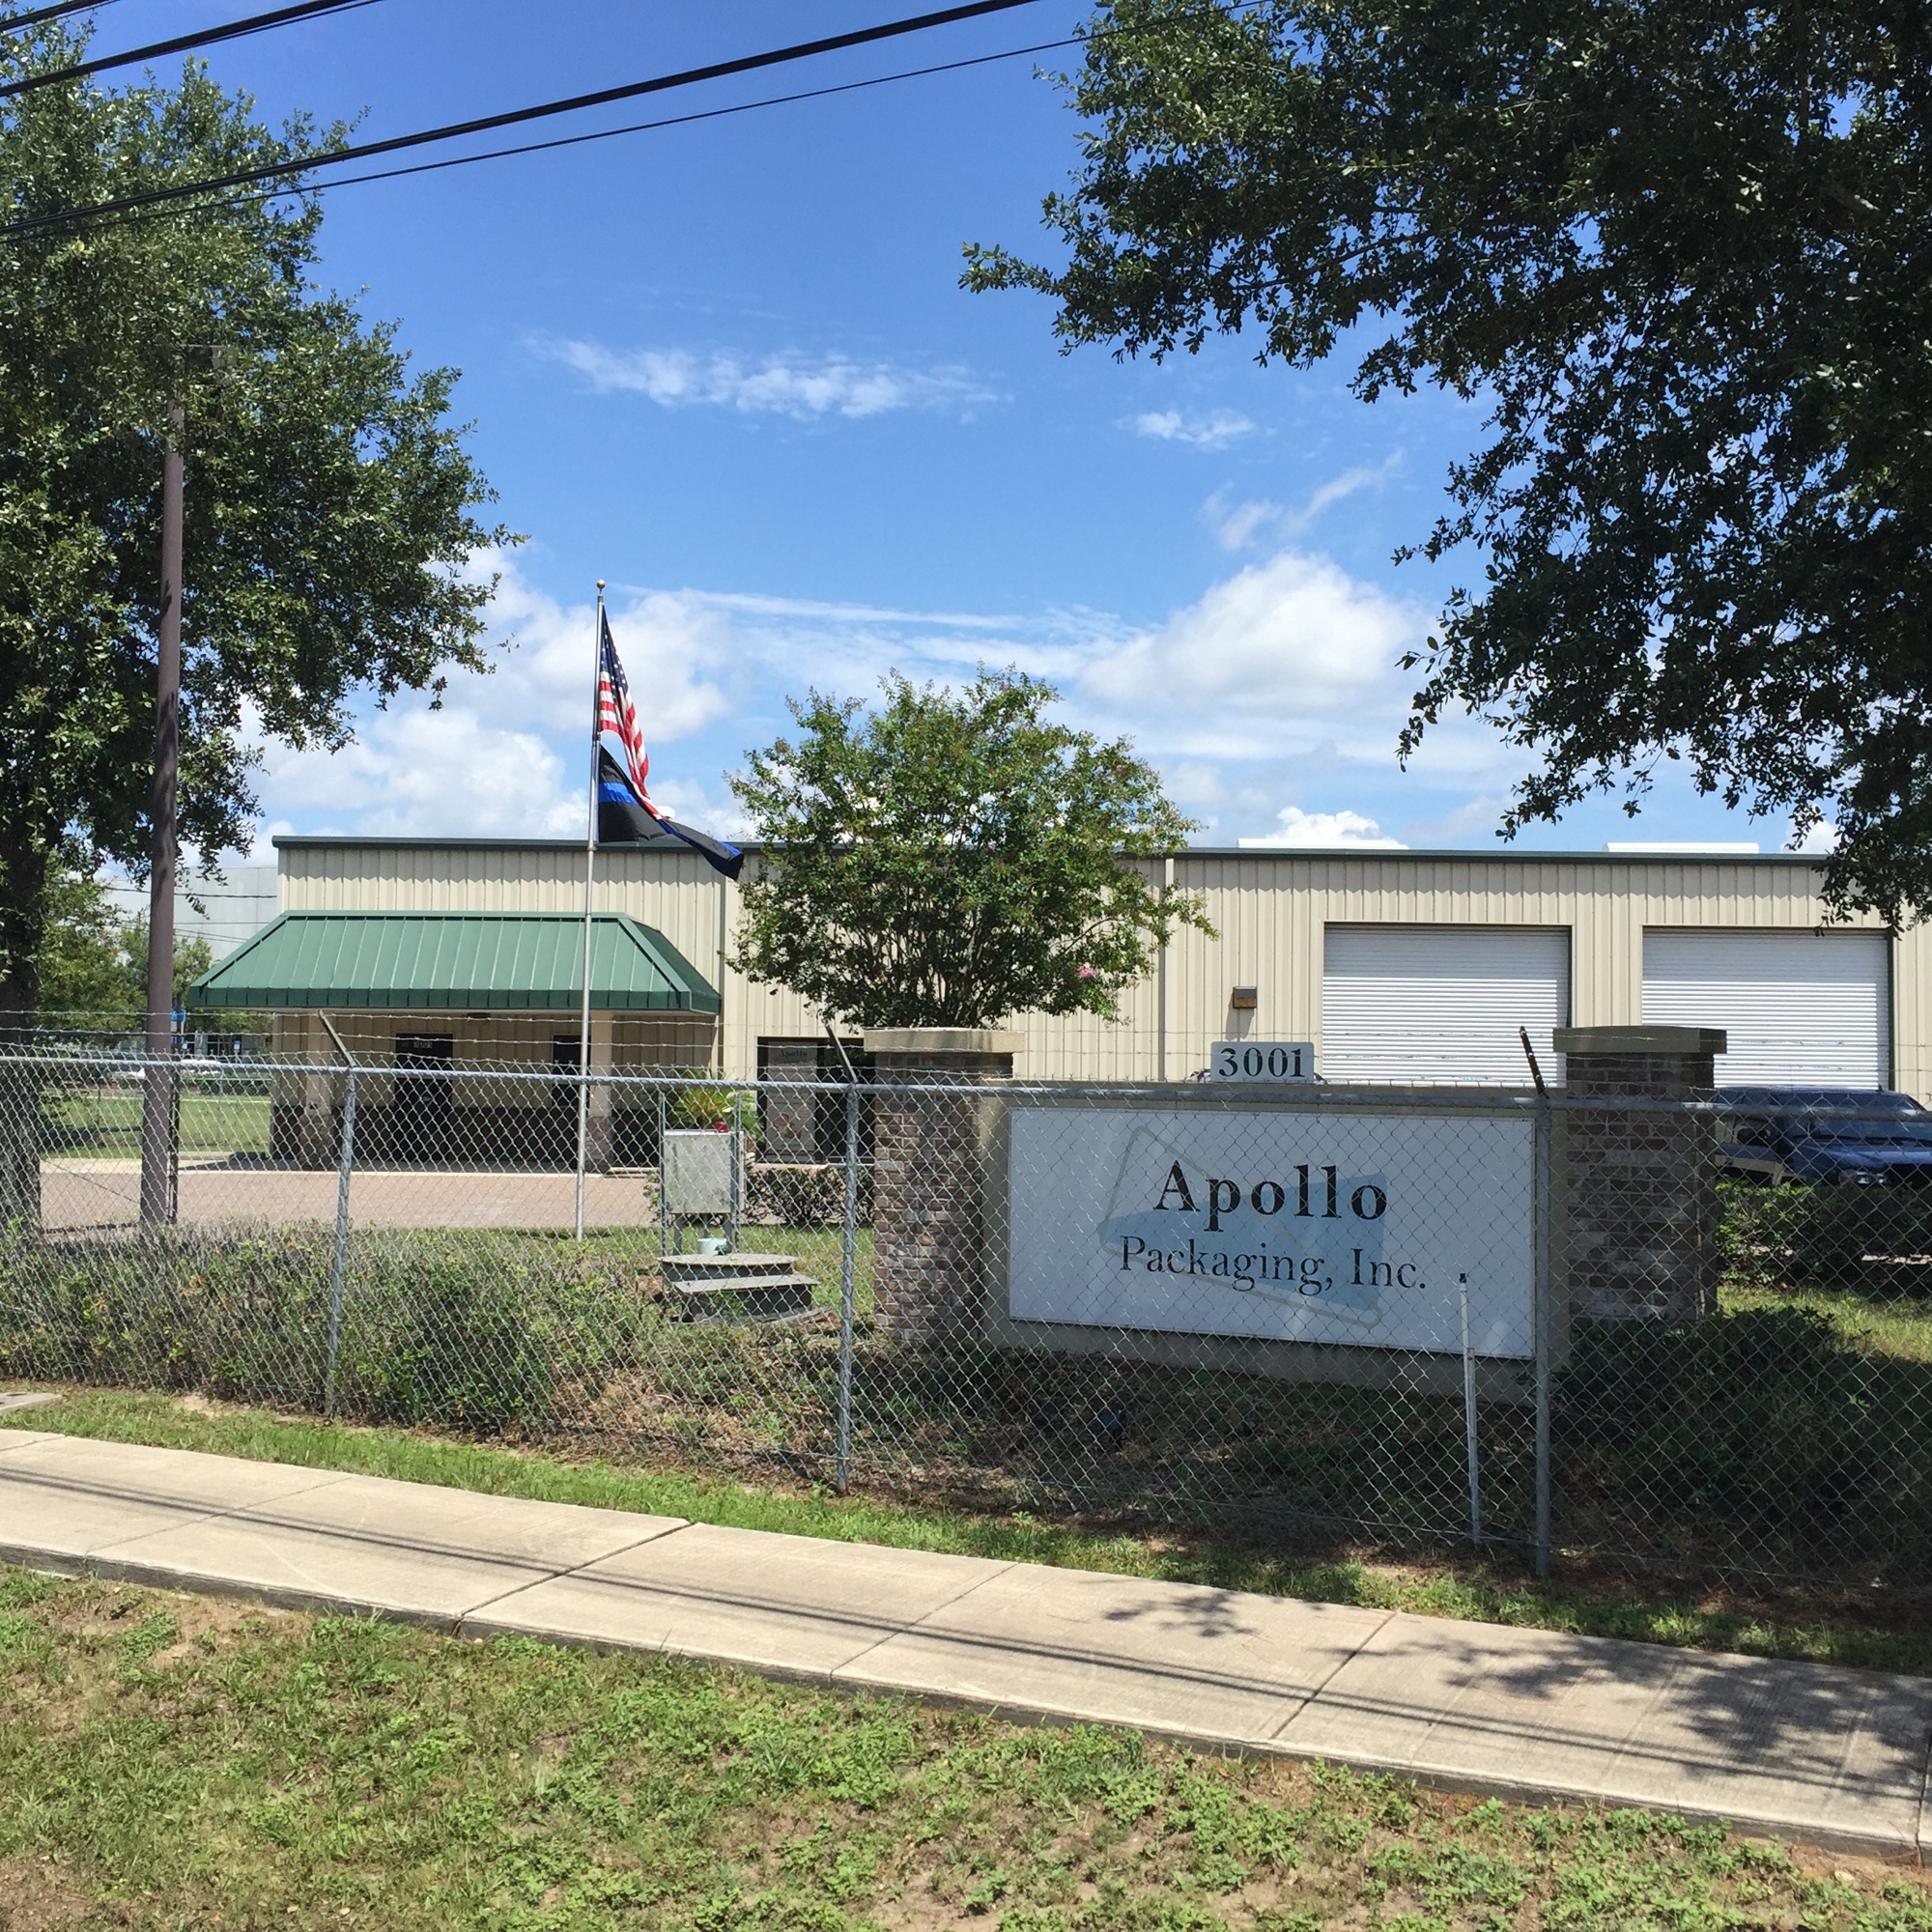 Apollo's warehouse at 3001 Faye Road in North Jacksonville